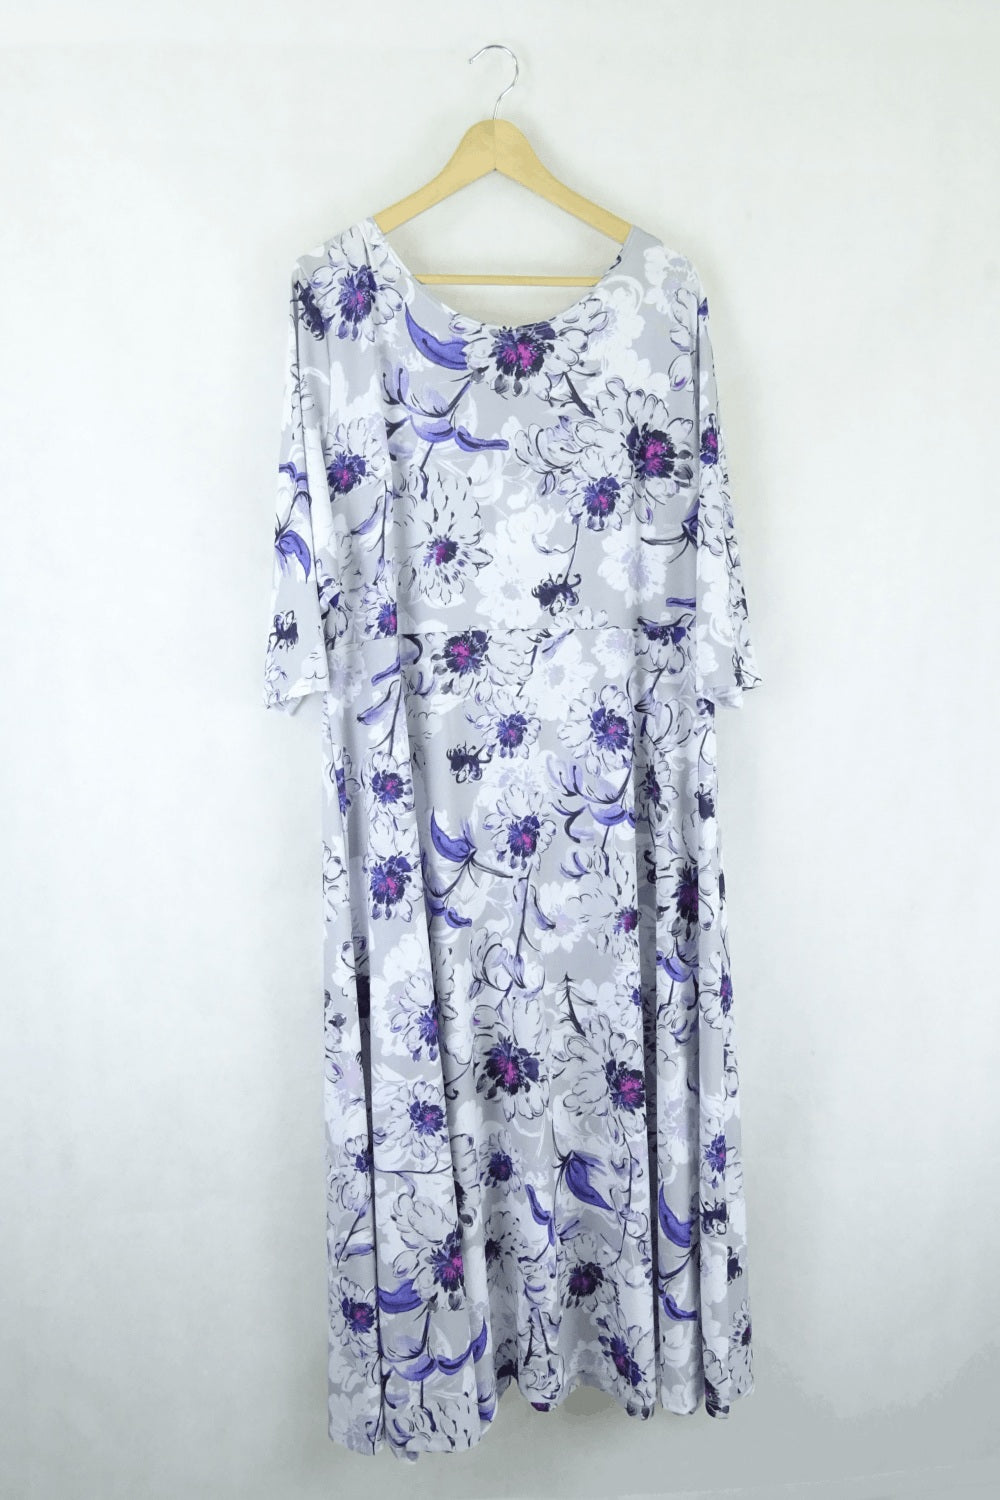 Lbisse Grey and Purple Floral Top XXXL